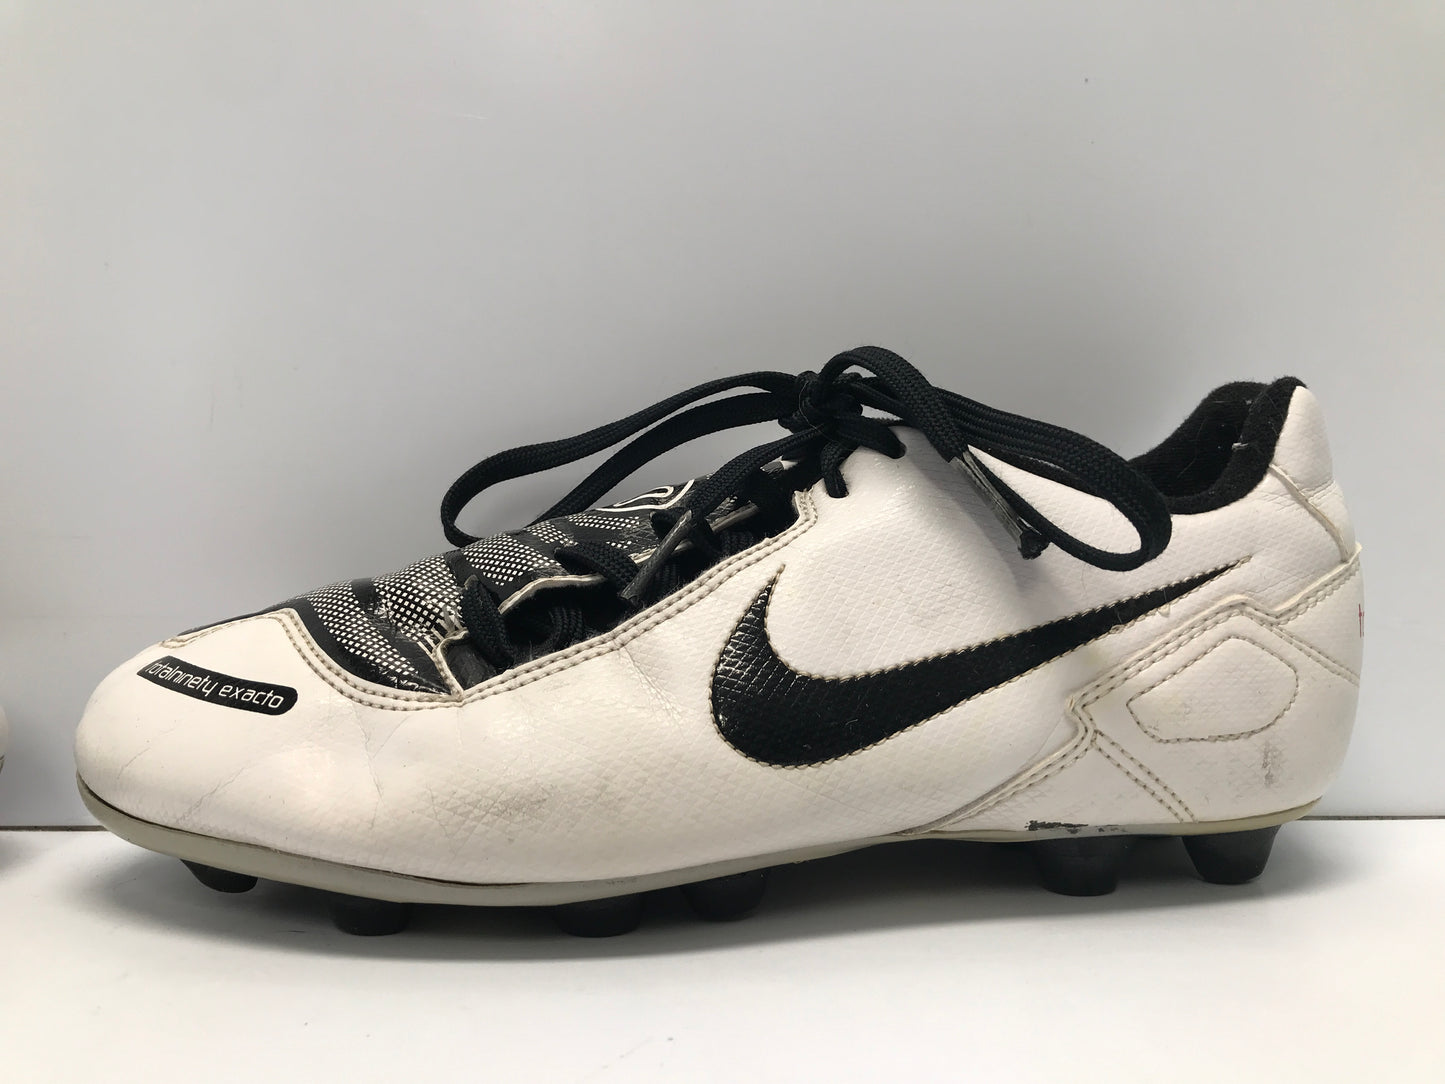 Soccer Shoes Cleats Men's Size 8.5 Wide Nike Total90 White Black